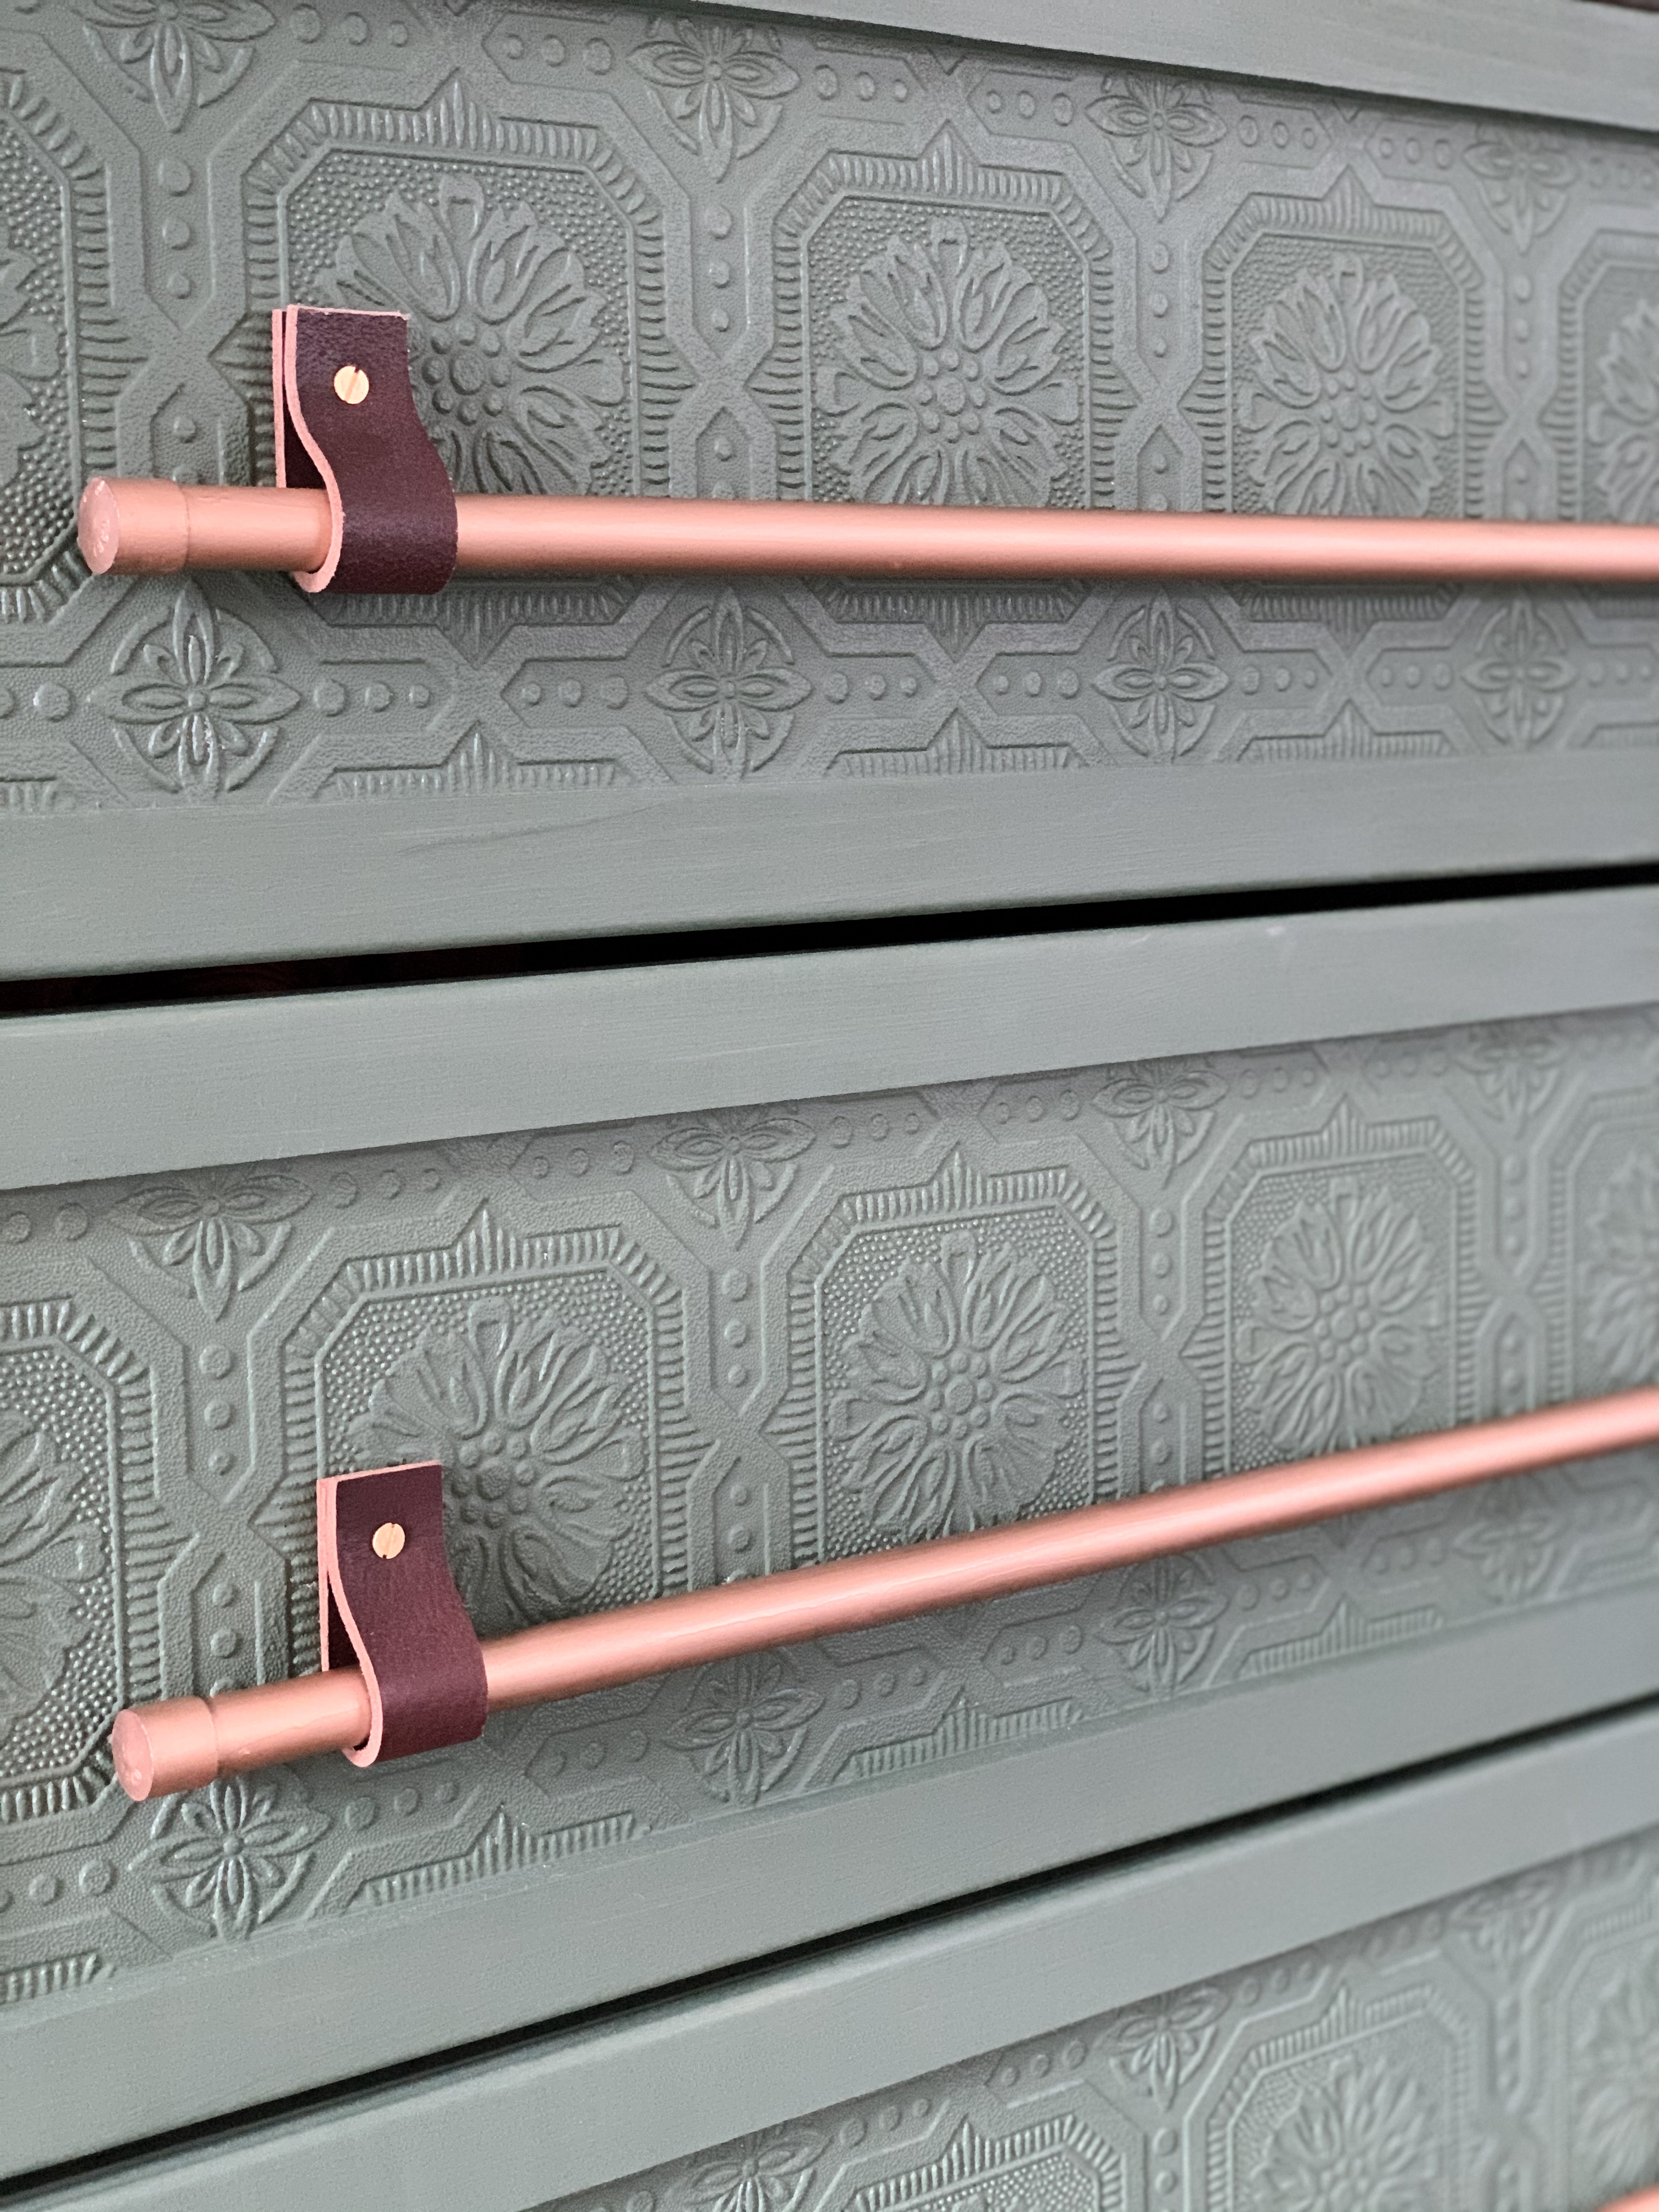 Closeup picture of drawers with green painted wallpaper and copper rods attached with leather straps.